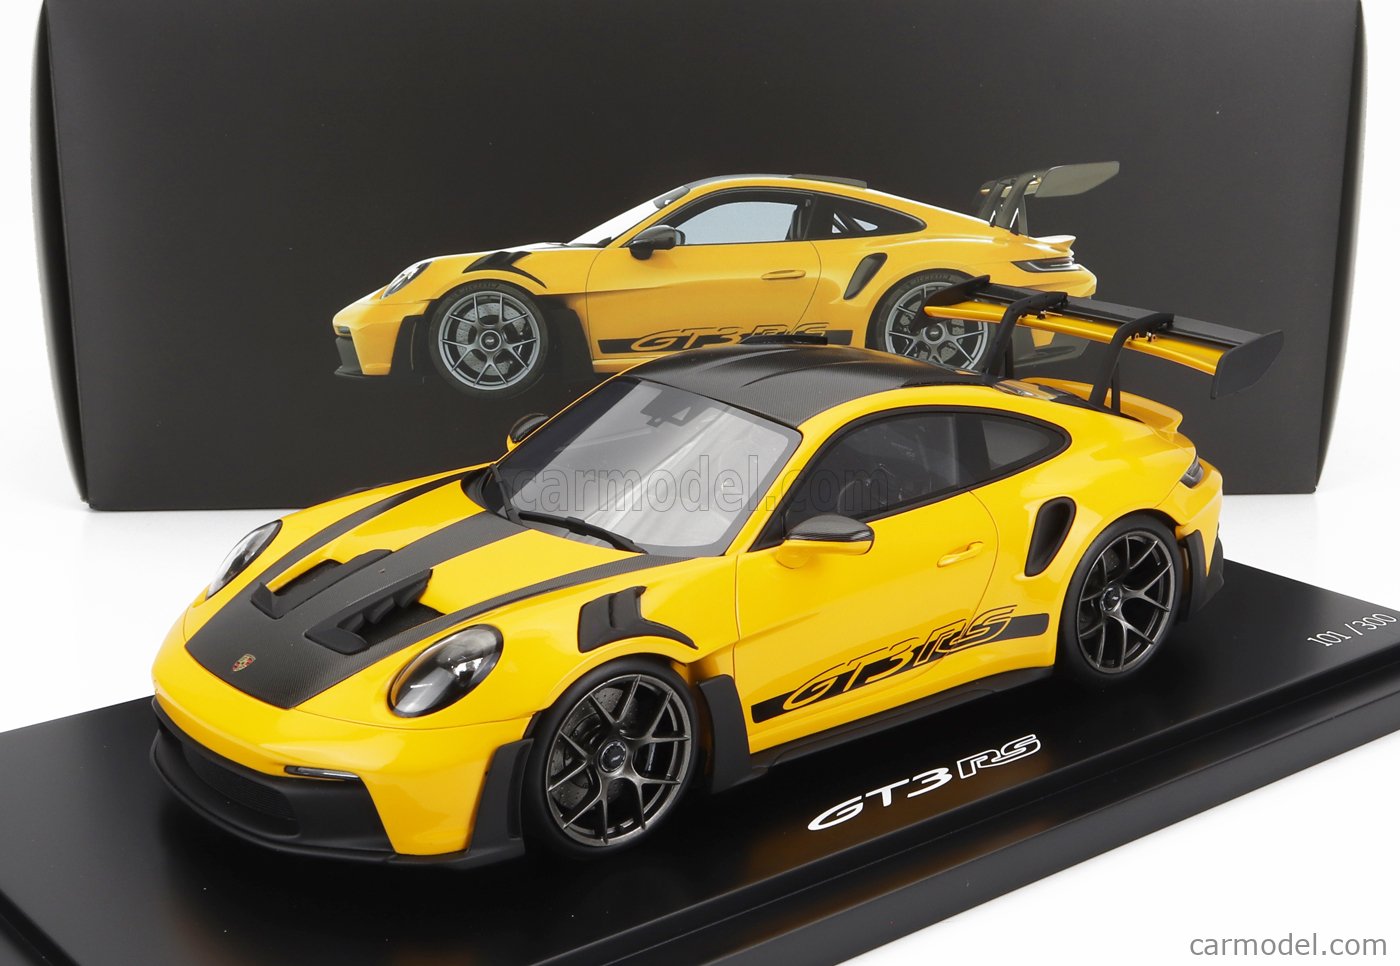 HOT豊富なSPARK 1:18 PORSCHE 911 GT3 R TEAM KCMG N 47 24h SPA 2020 / ポルシェ 991.2 GT3R スパーク 送料無料 他 1:43 特注 など 同封発送可 レーシングカー